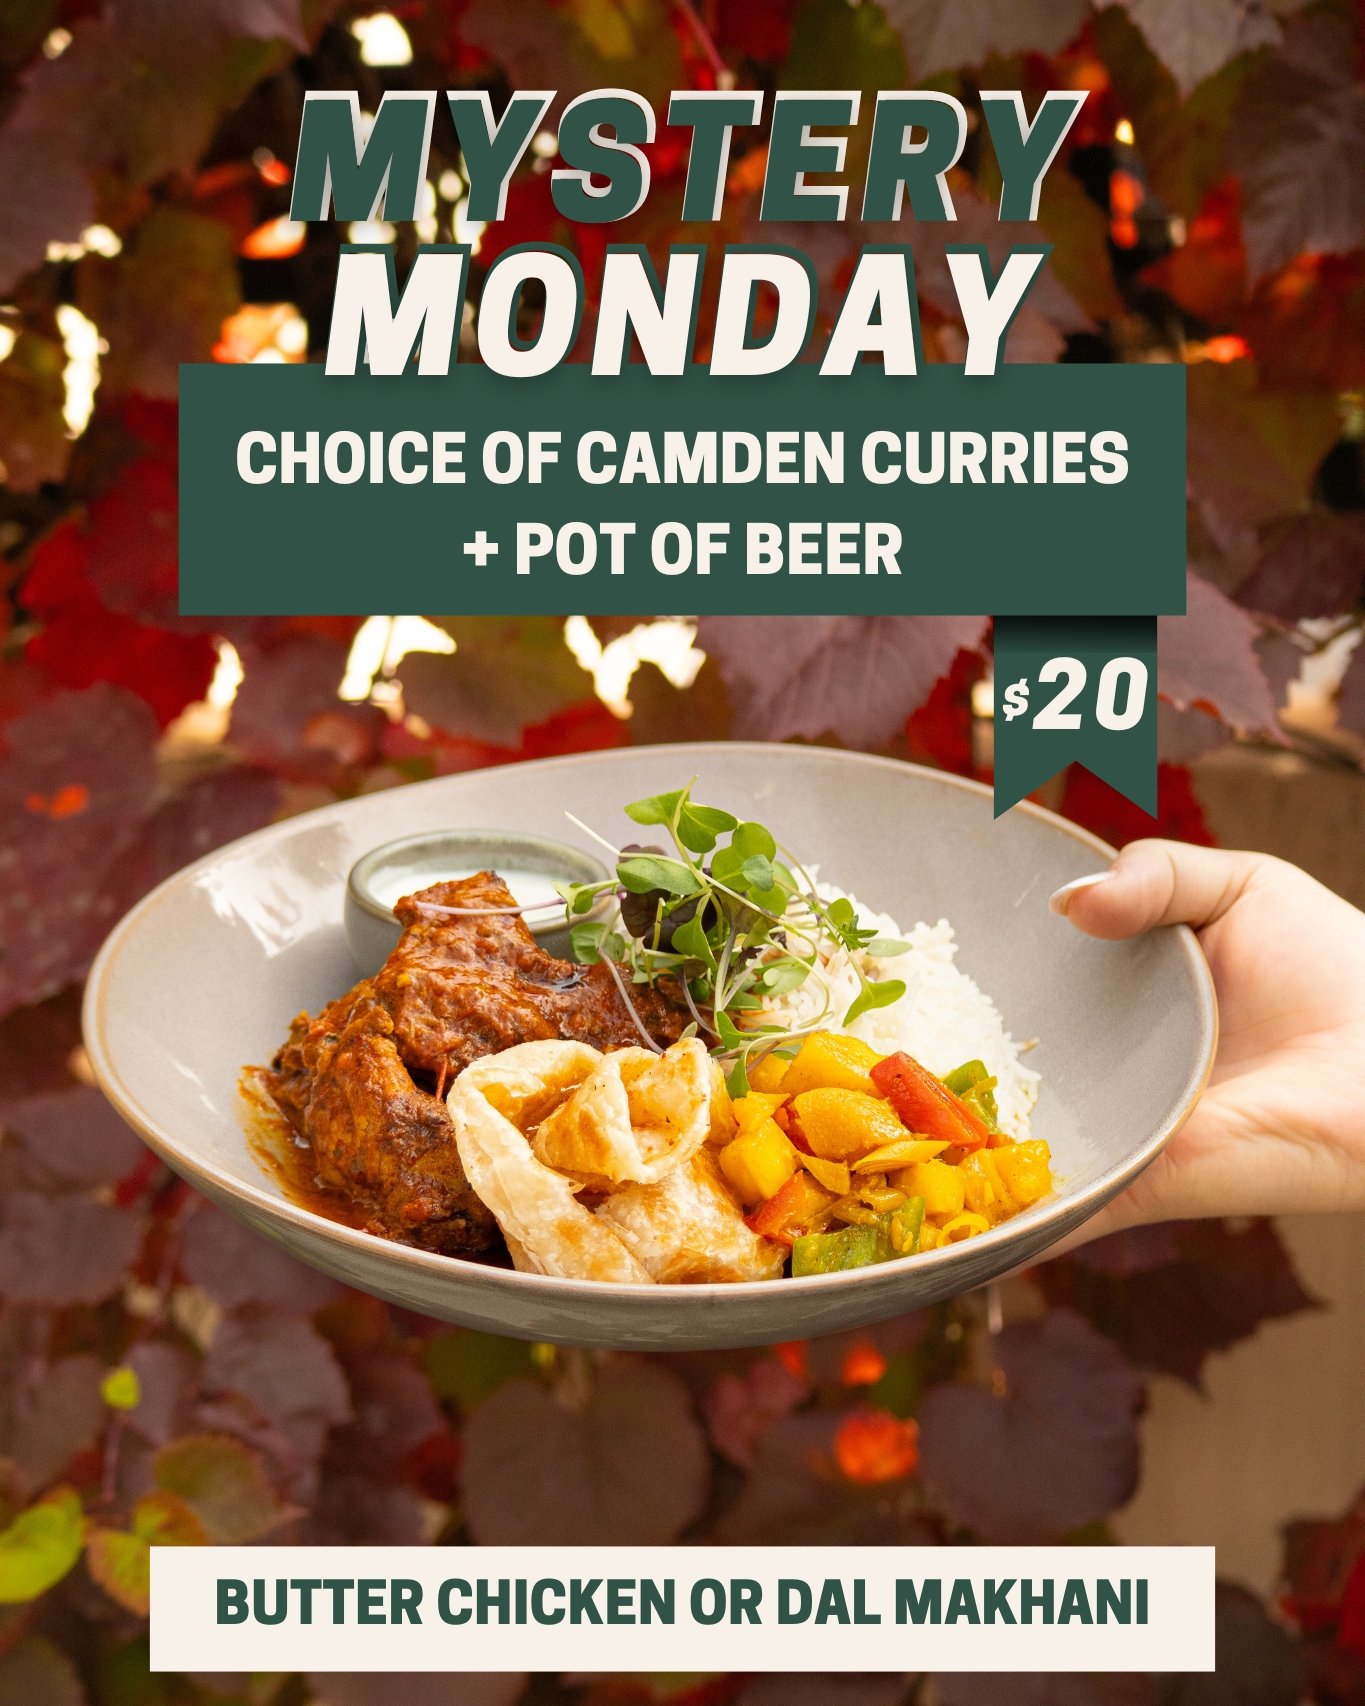 Our Mystery Monday is here to warm your chilly days. For this week only, treat yourself to a combo of The Camden curry and beer for just $20! Hurry up, deliciousness awaits!

#Autumn #spring #winter #fall #veggies #friends #family #foodgasm #veganfoo